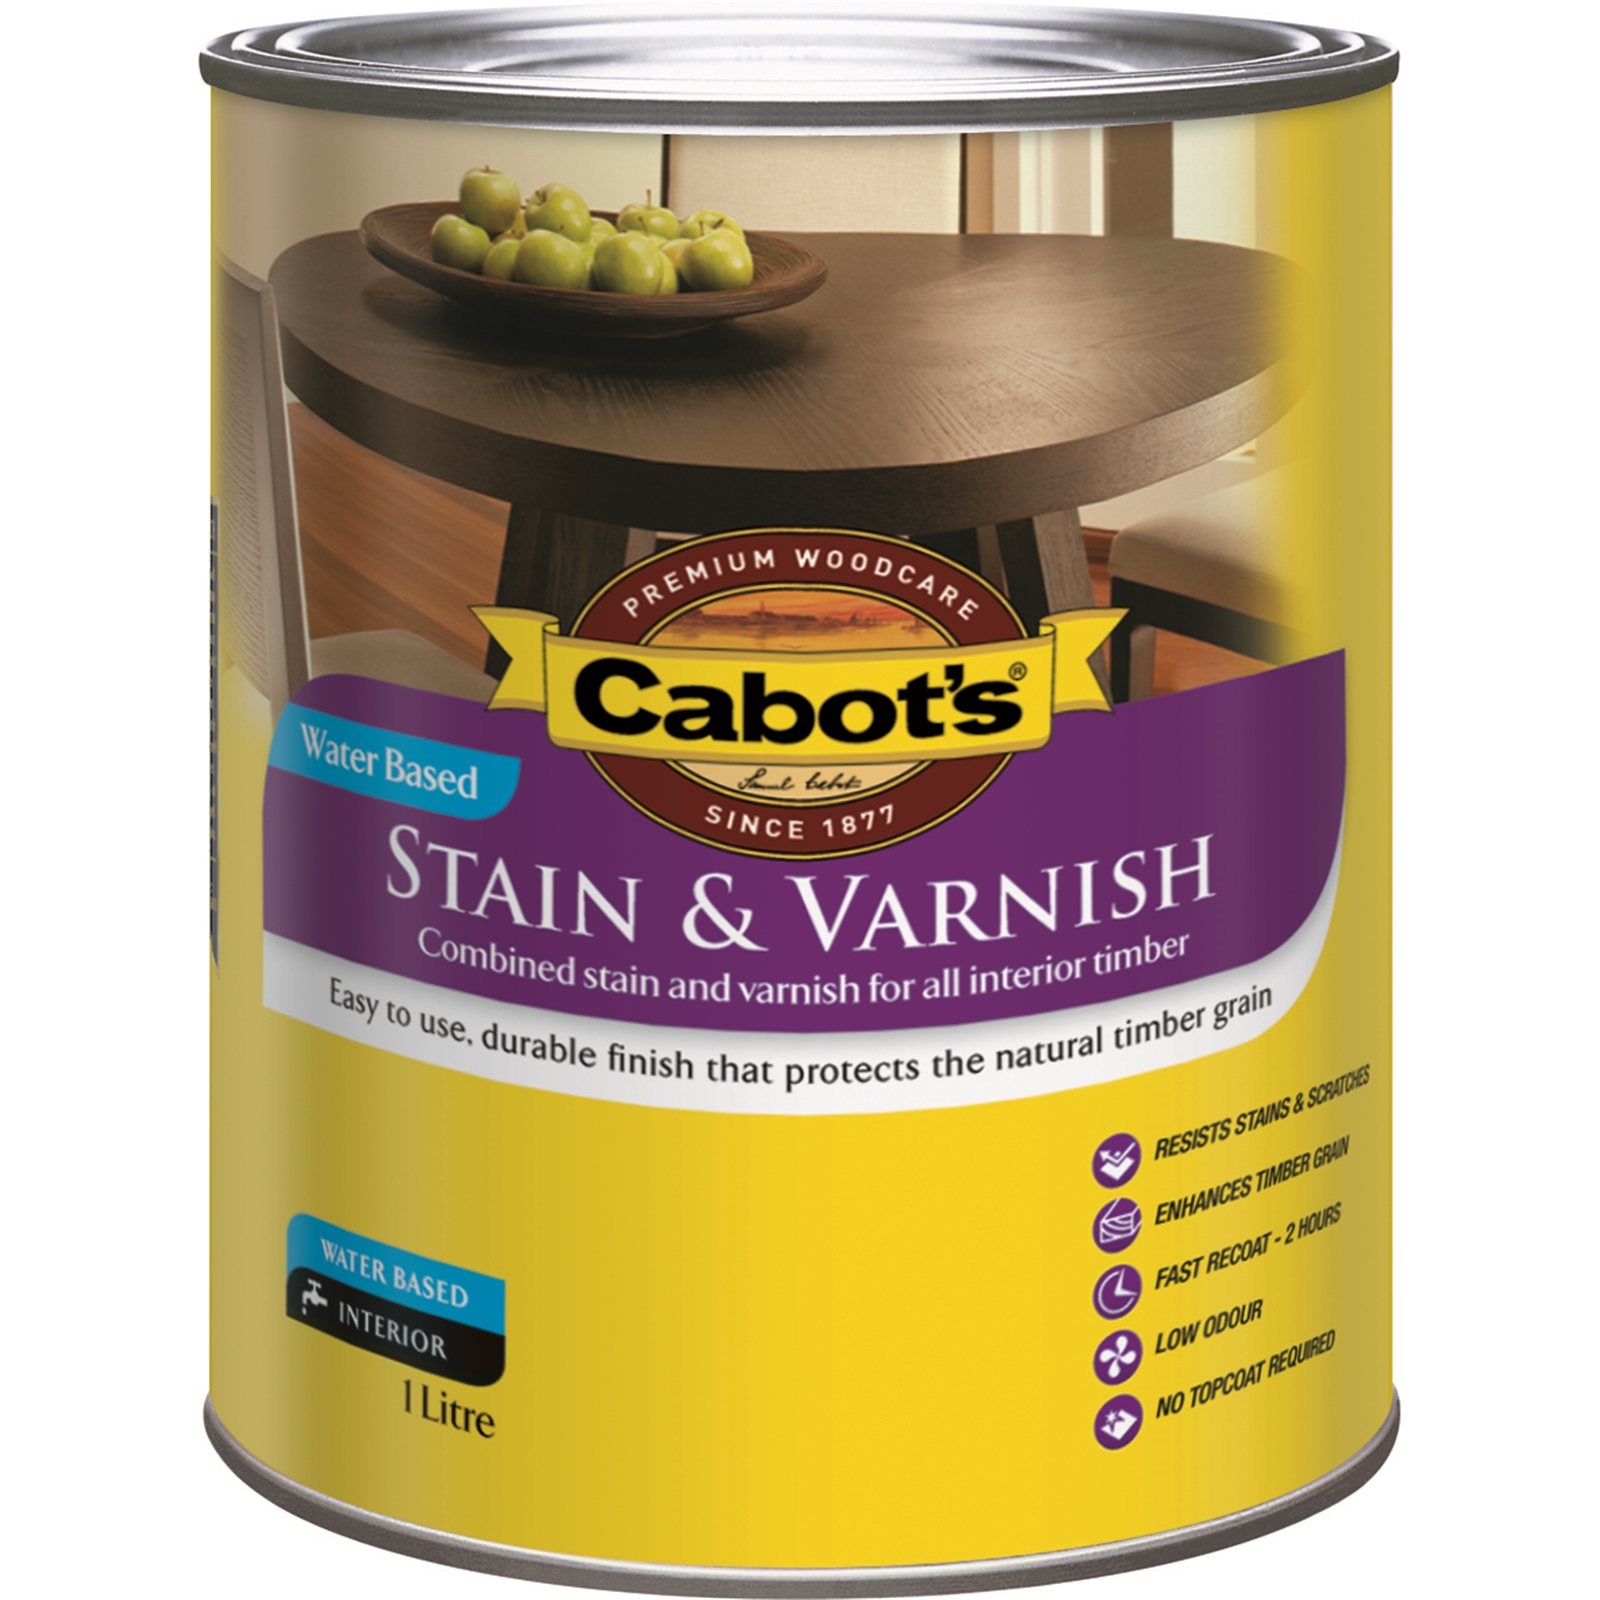 Cabot's 1L Satin Cedar Water Based Stain and Varnish